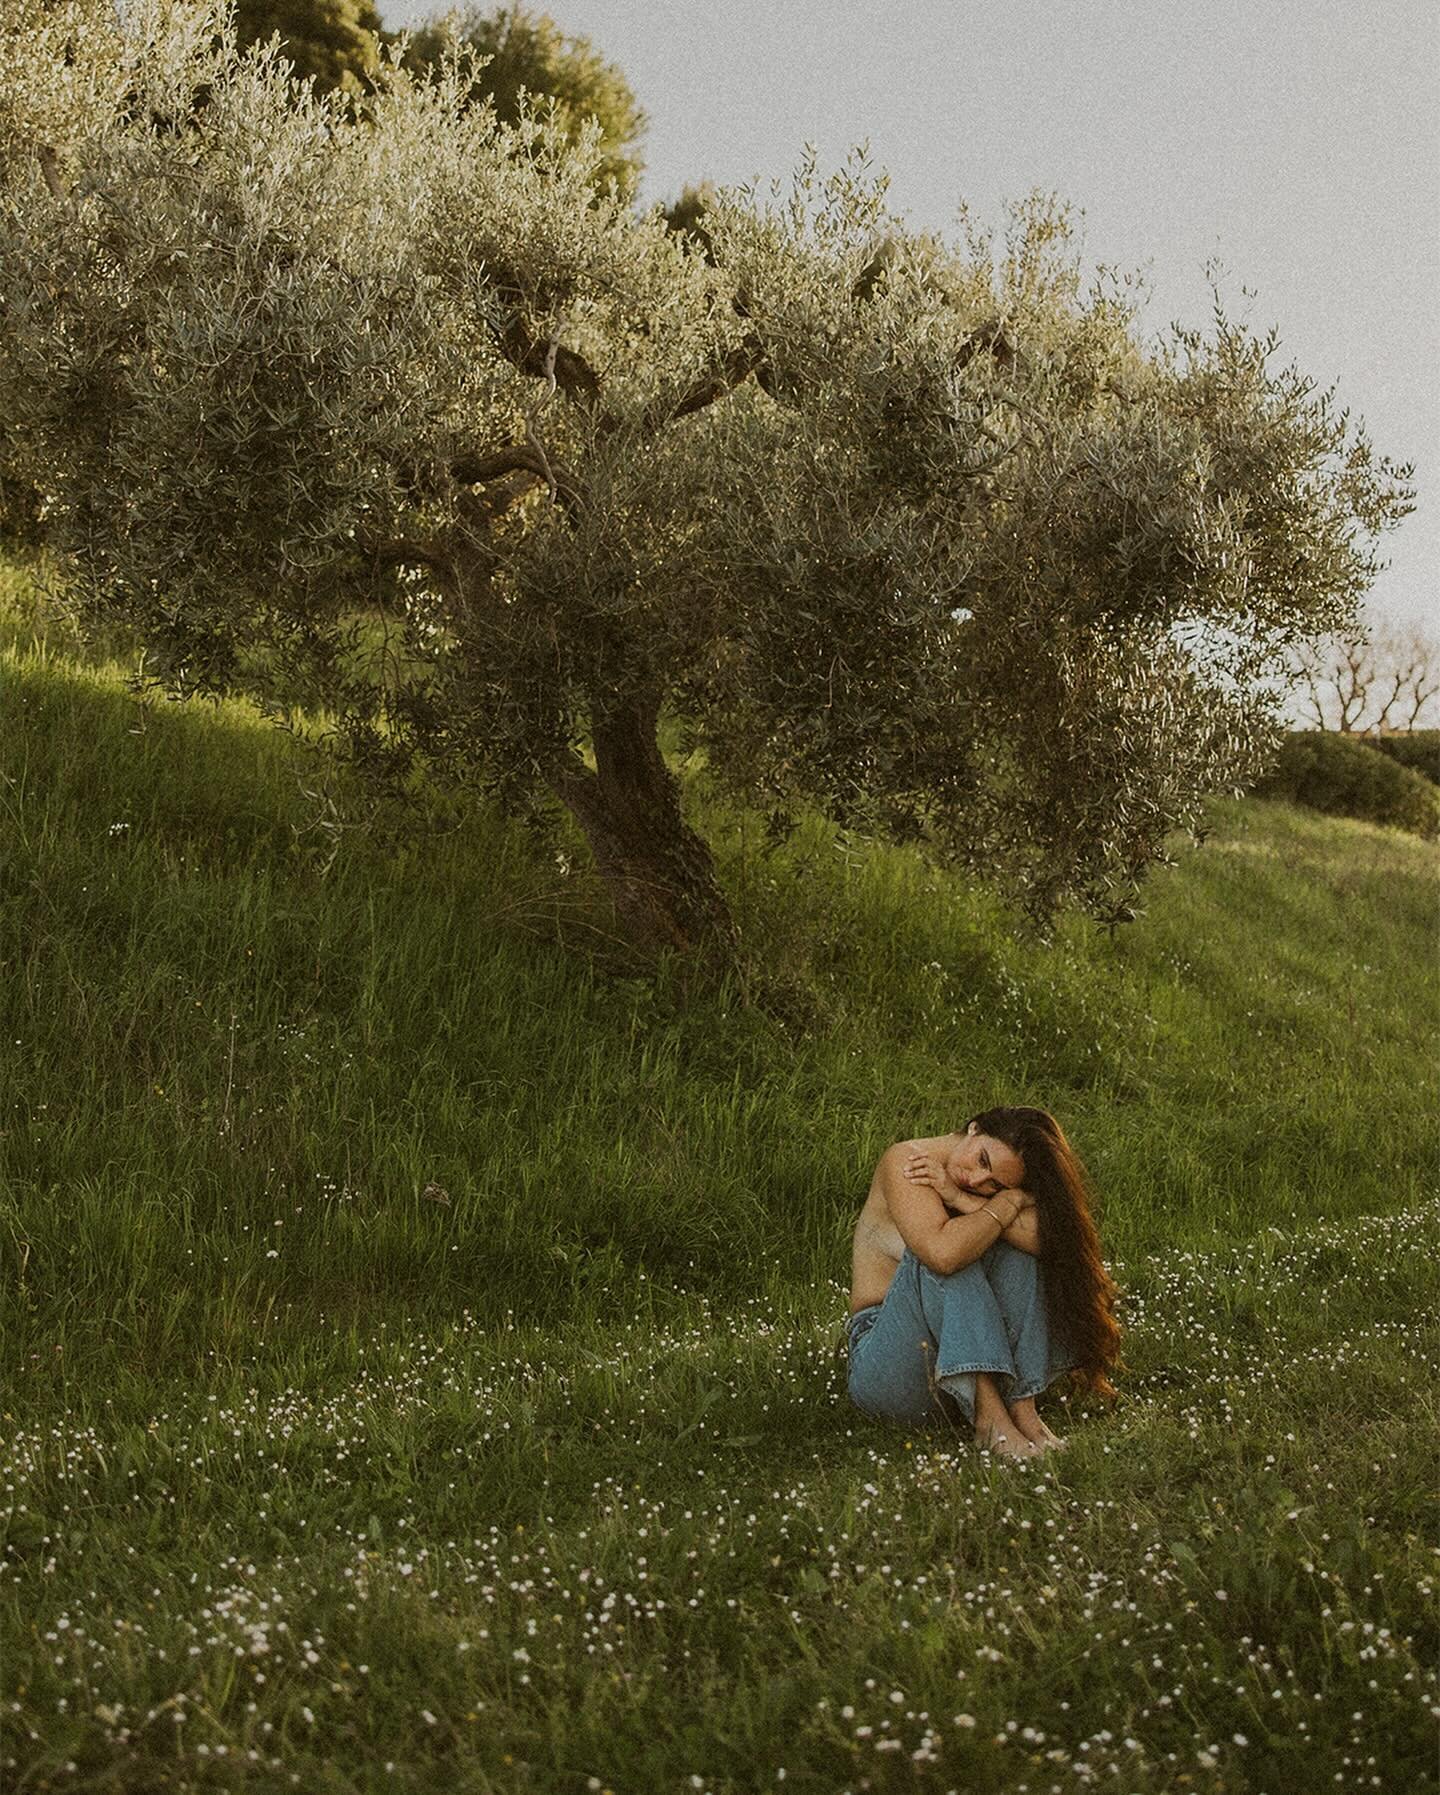 Silvana in the Olive Grove. 

Time spent among these trees will be some of the most impactful of my days. I did my 200 hour yoga teacher training with @thecollectivekula this March in Italy, and the days walking barefoot on the land of @villaolivomar